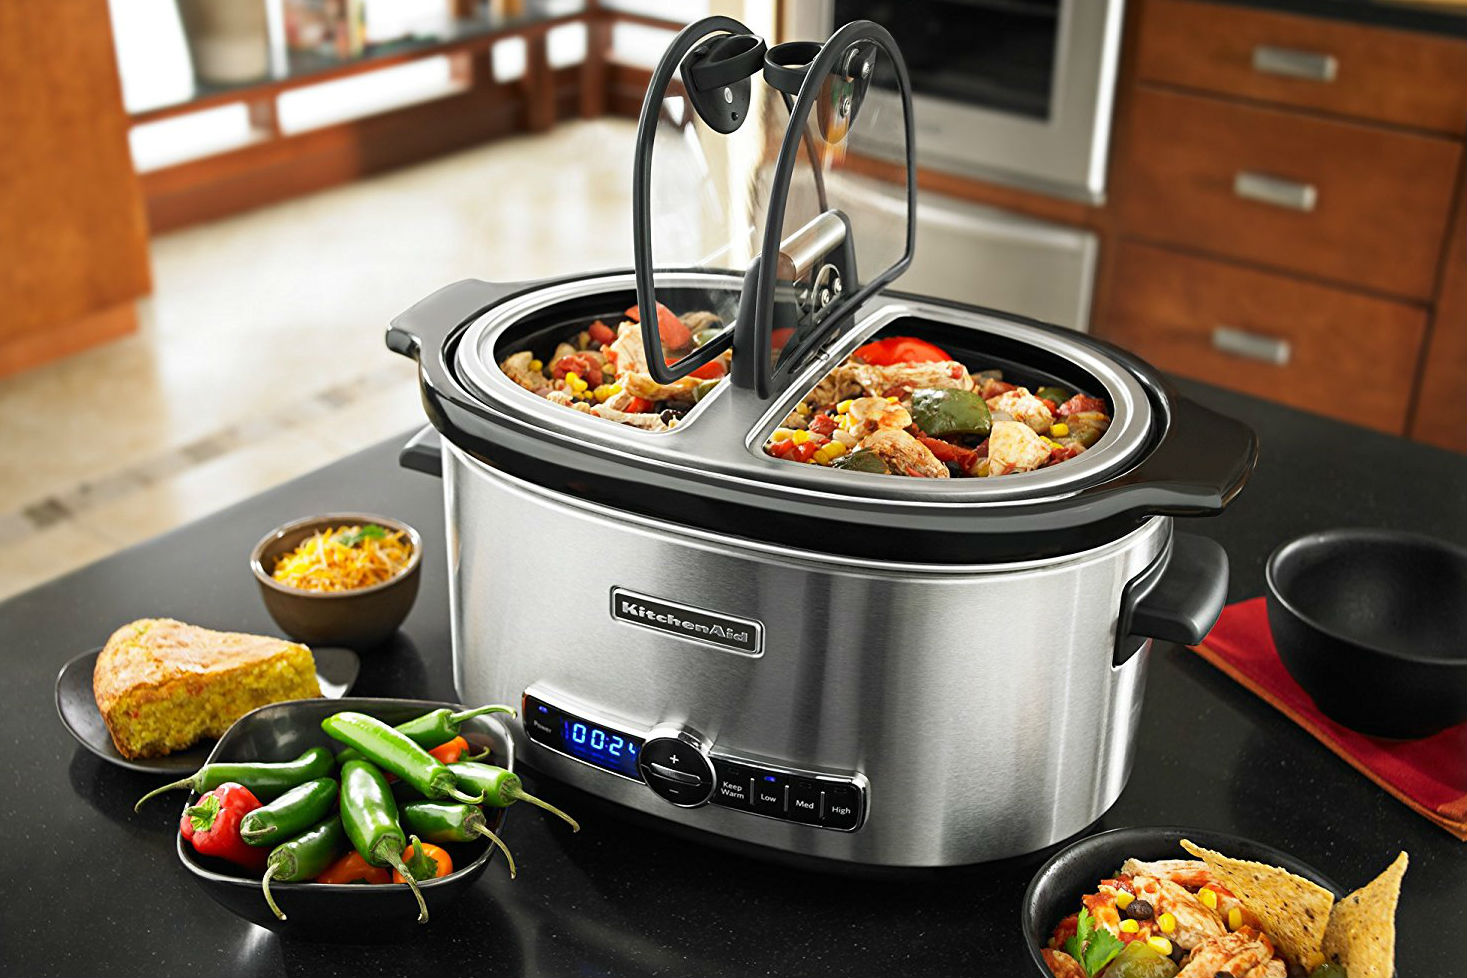  Crock-Pot SCCPVI600-S 6-Quart Countdown Programmable Oval Slow  Cooker with Stove-Top Browning, Stainless Finish: Home & Kitchen